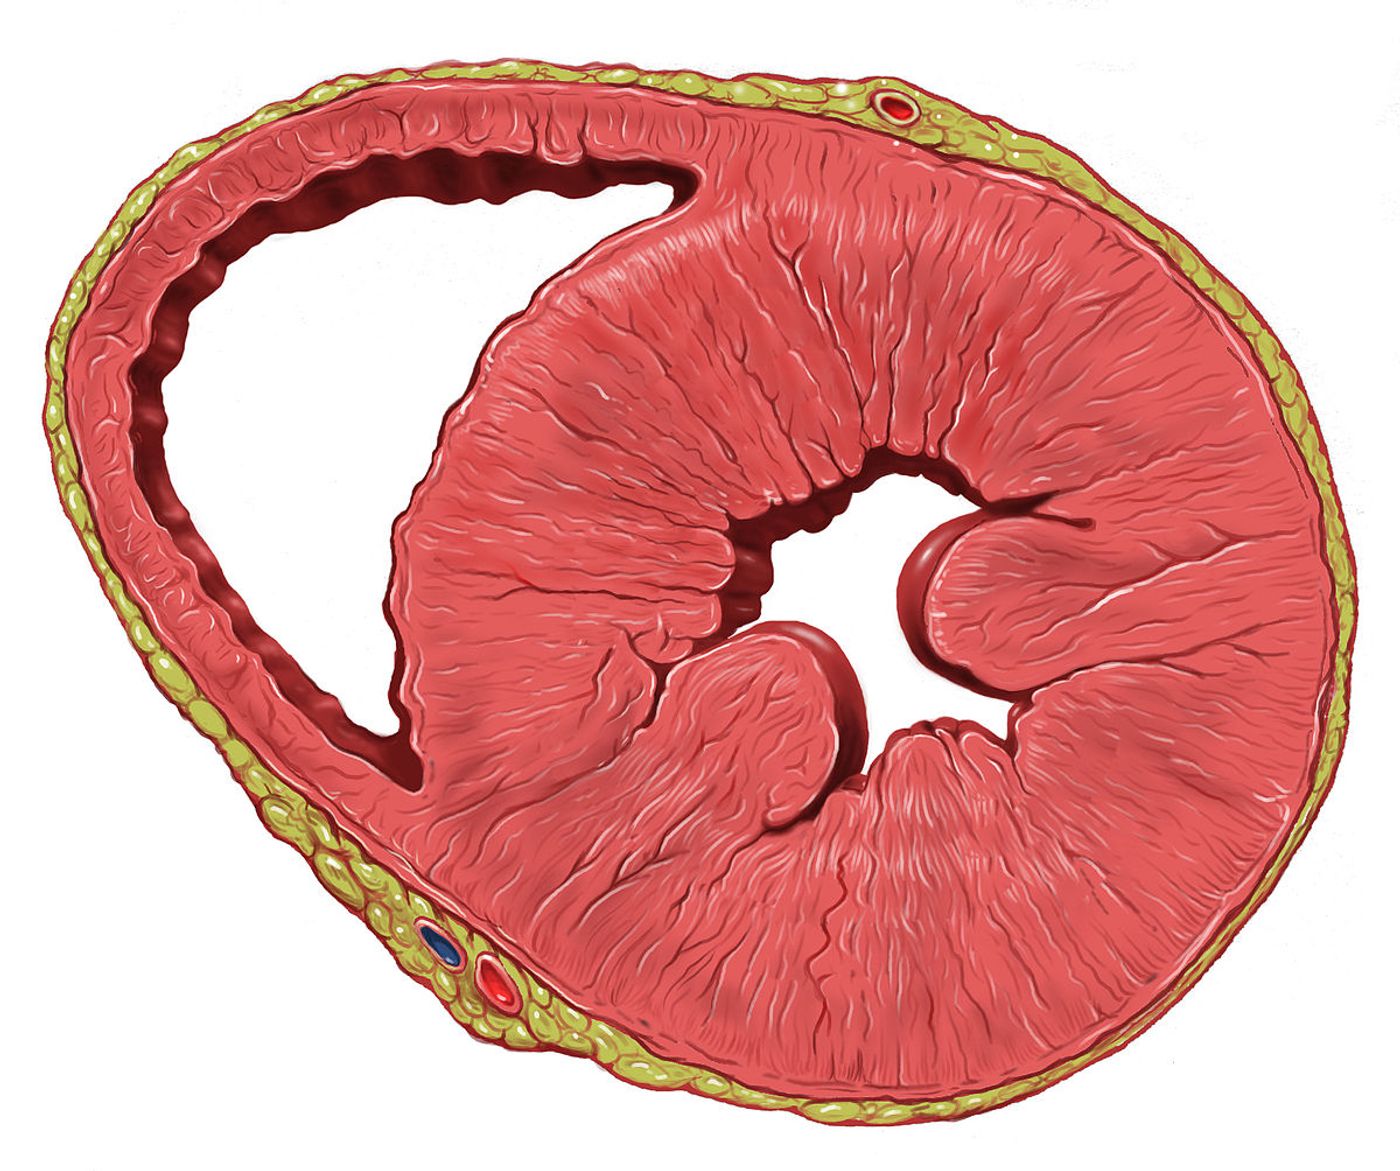 A heart with left ventricular hypertrophy in short-axis view.